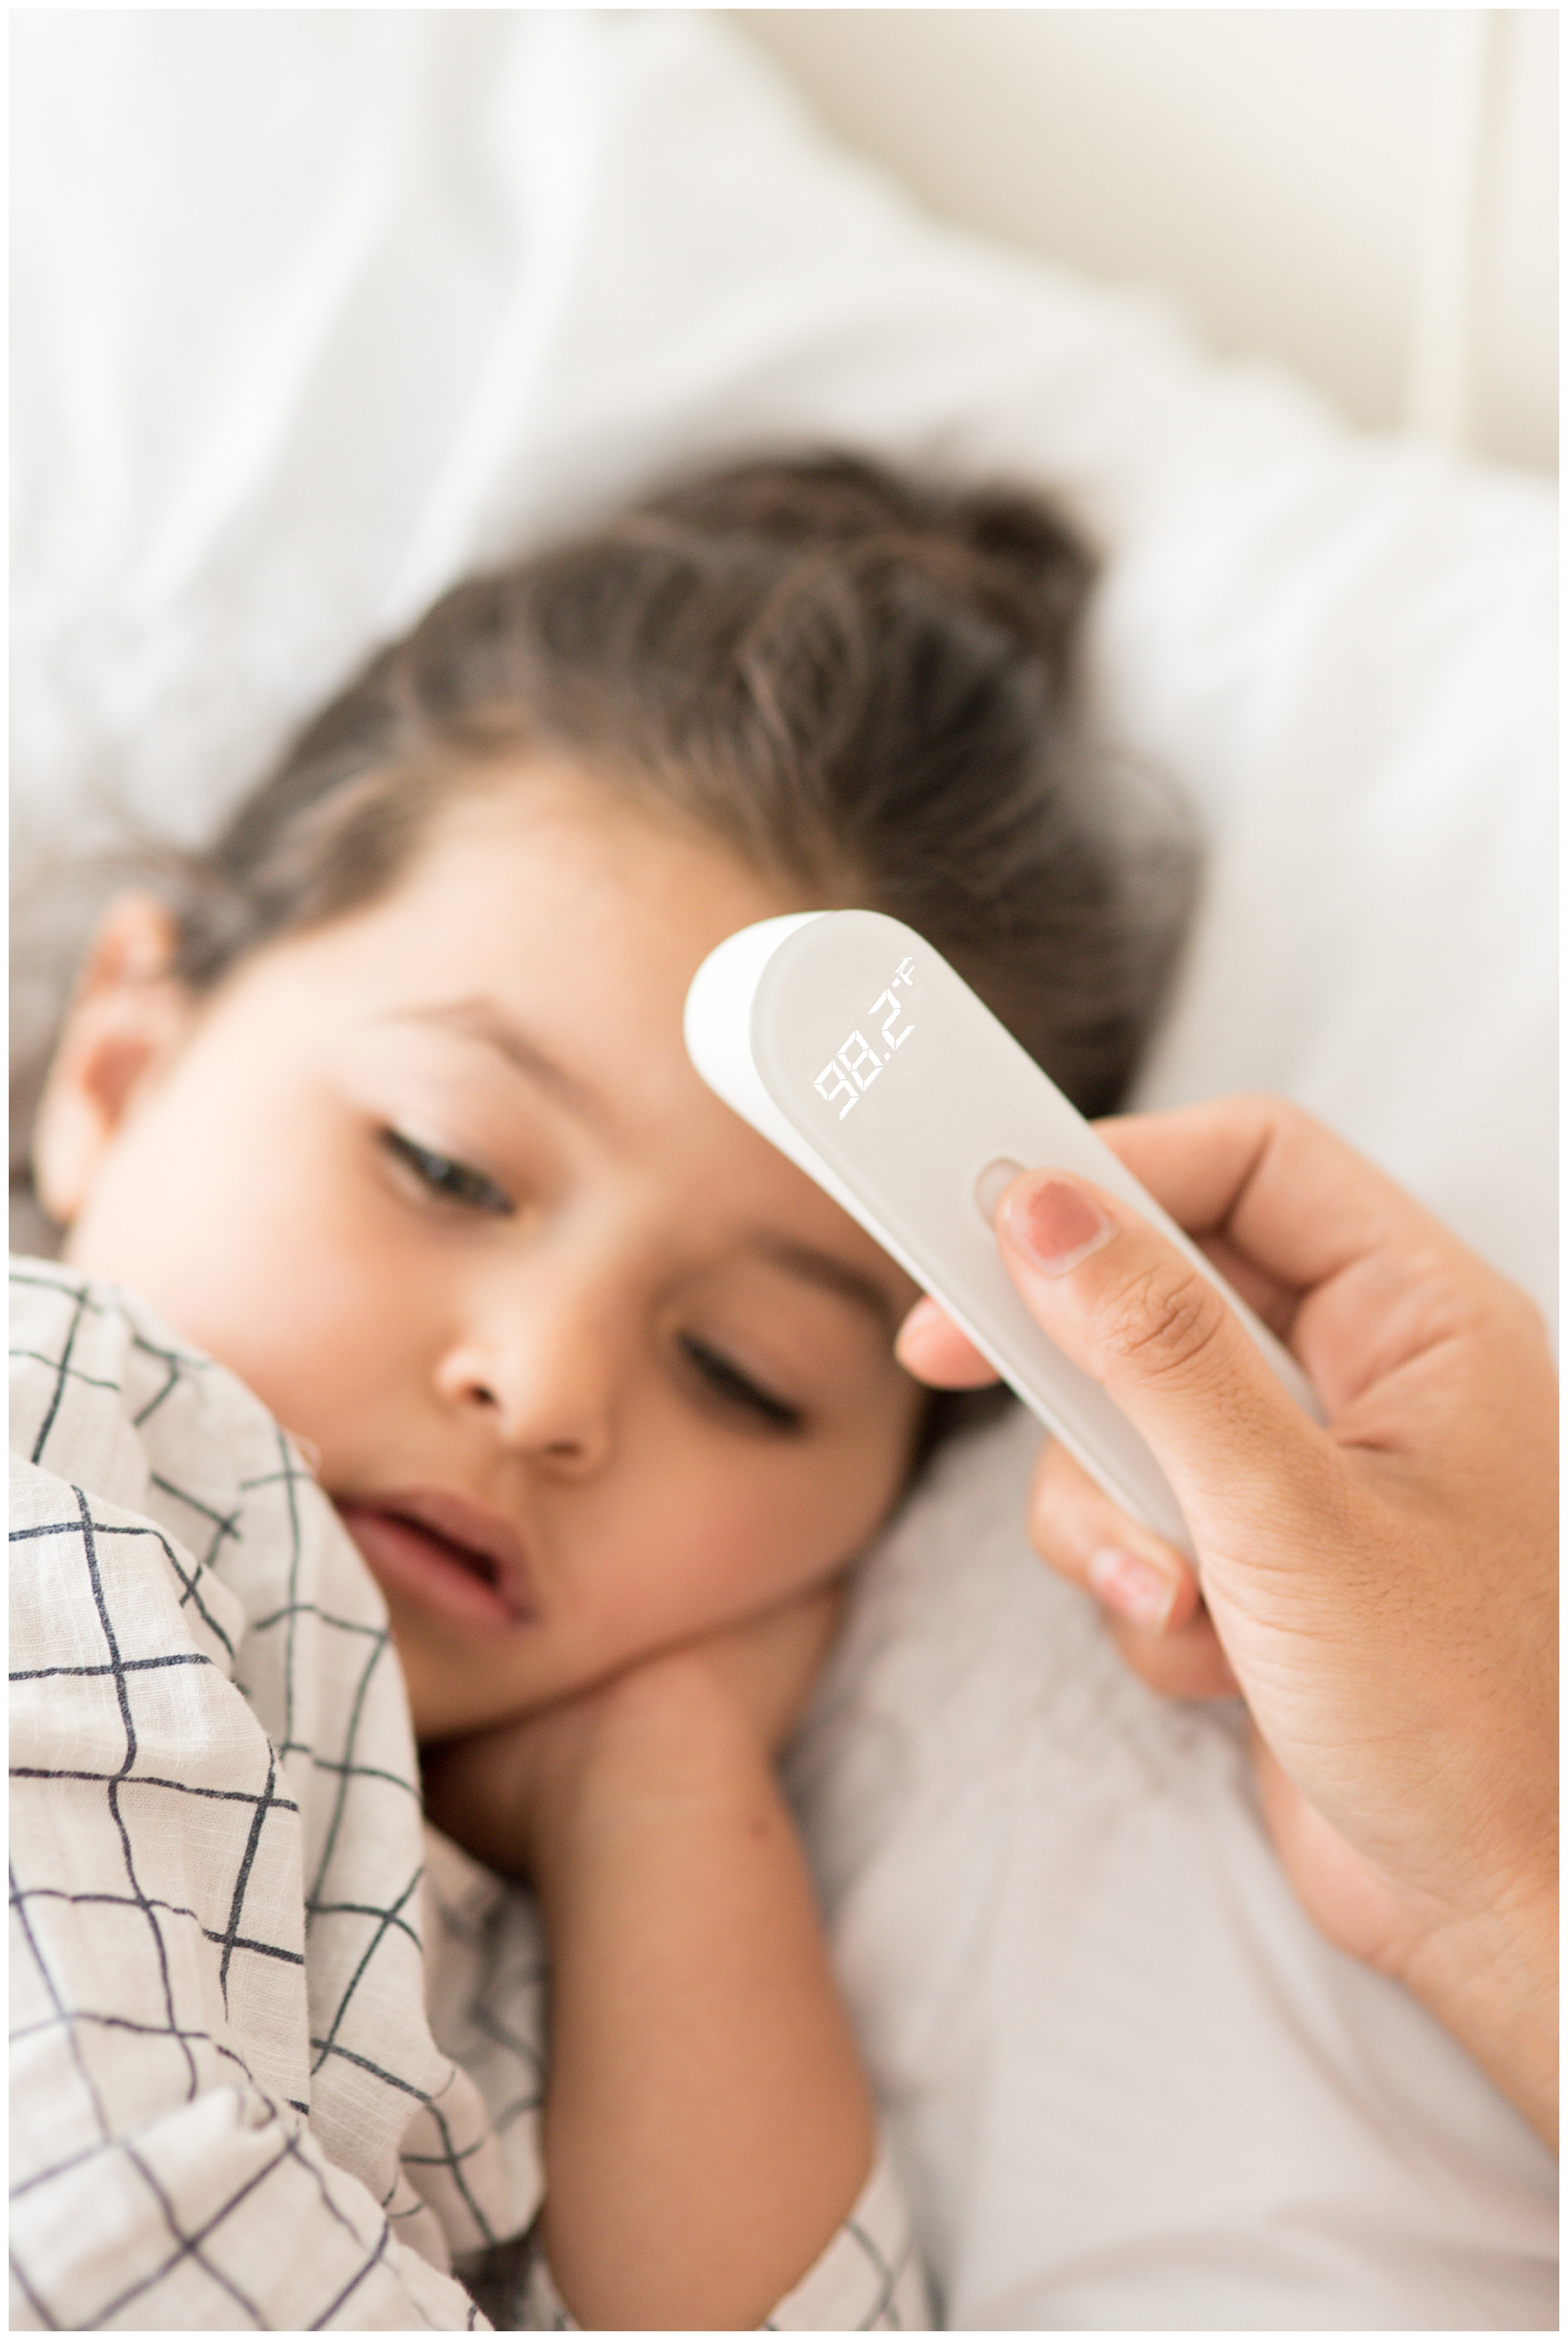 iHealth Forehead Thermometer, Infrared Baby Thermometer for Best Accuracy with 3 Ultra Sensitive Sensors,Medical Digital Fever Thermometer with New Algorithm,Instant Reading for Baby Kids and Adults, Commerical Photographer, Lauren Ryan Photography, Picture Marvelous Photography, 